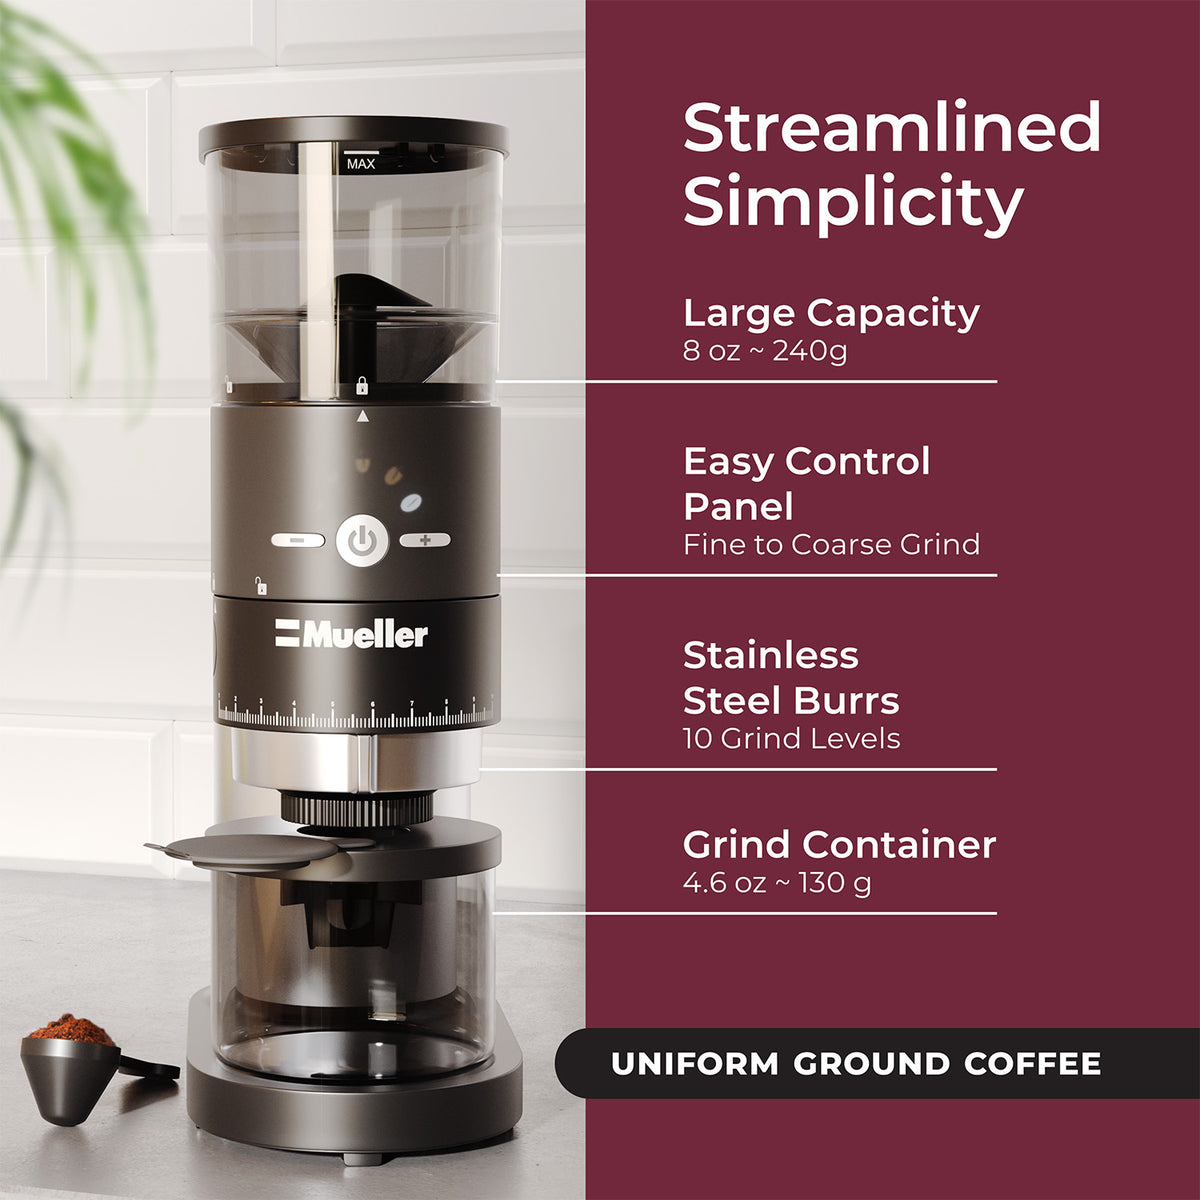 Mueller Precision Coffee Grinder. Grinding whole beans will always